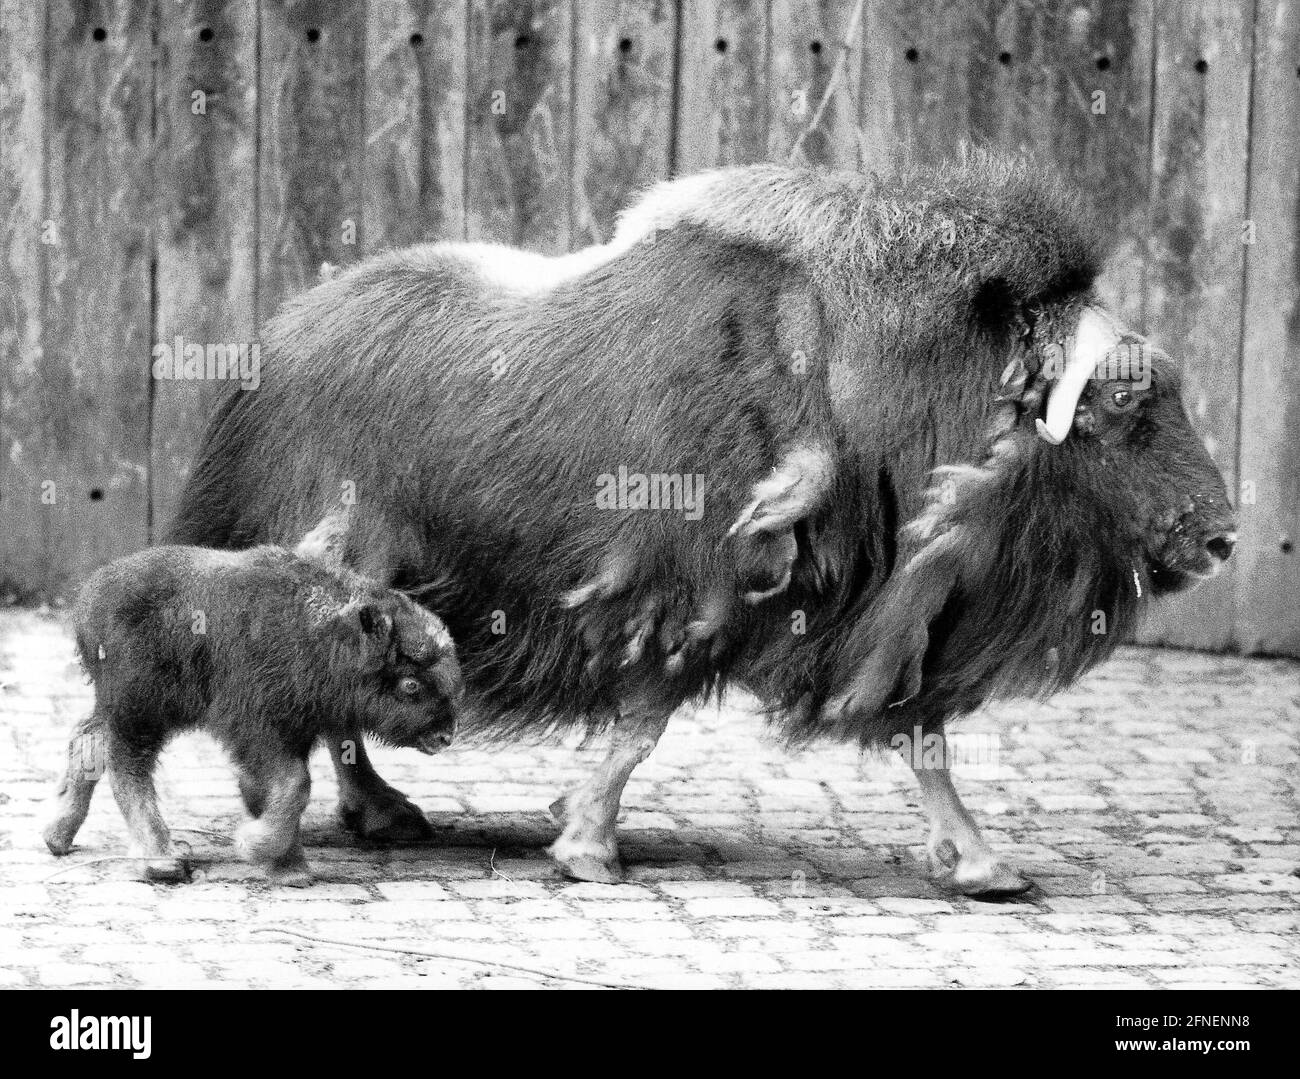 'Puffi's first oxen tour: In order not to leave Mommy's side, the only three-week-old baby musk ox ''Puffi'' has to go all out in Munich's Hellabrunn Zoo. On their first walk through the enclosure together, mother Pamela was always one or two steps ahead of her youngest. Because musk oxen don't like their male offspring very much, father ''Paul'' is only allowed to watch his offspring's first walks from a distance. (Photo: Schulz) [automated translation]' Stock Photo